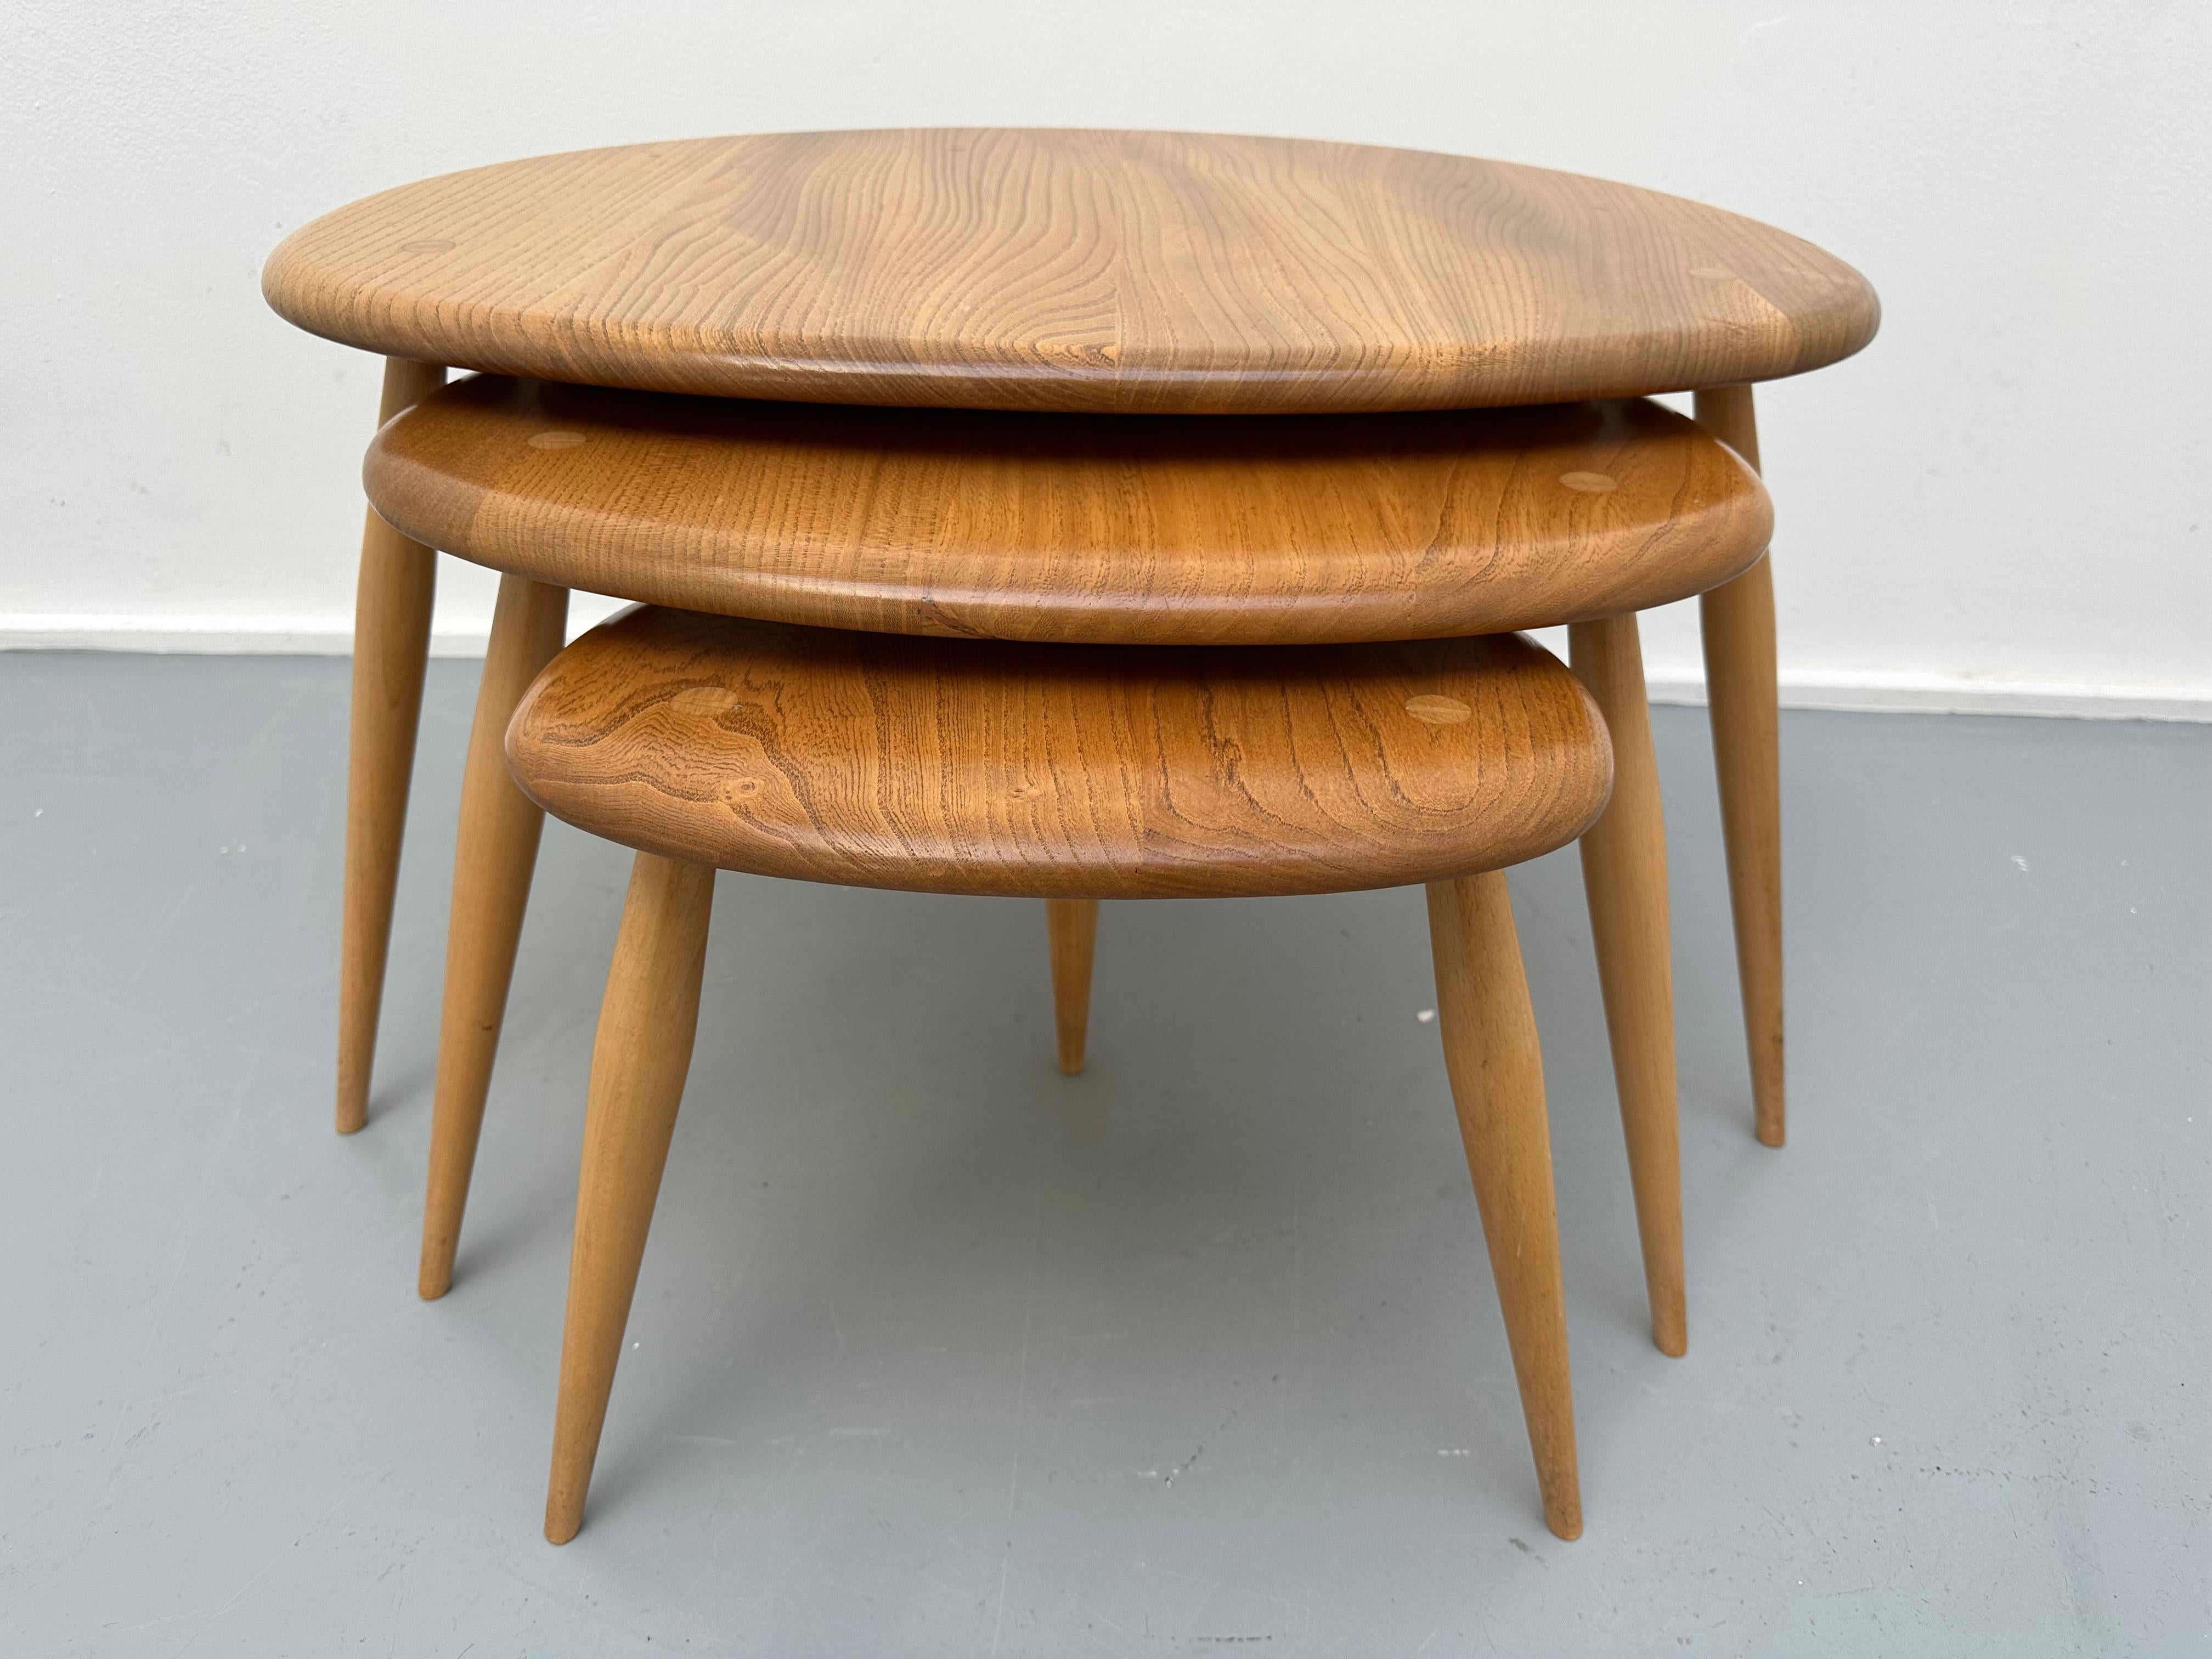 1960s Ercol nest of three 'Pebble' shaped coffee or side tables. Model 354. The table tops are constructed from planks of English Elm and the legs in Beech. This design classic consists of three individual tables, each one sliding neatly underneath